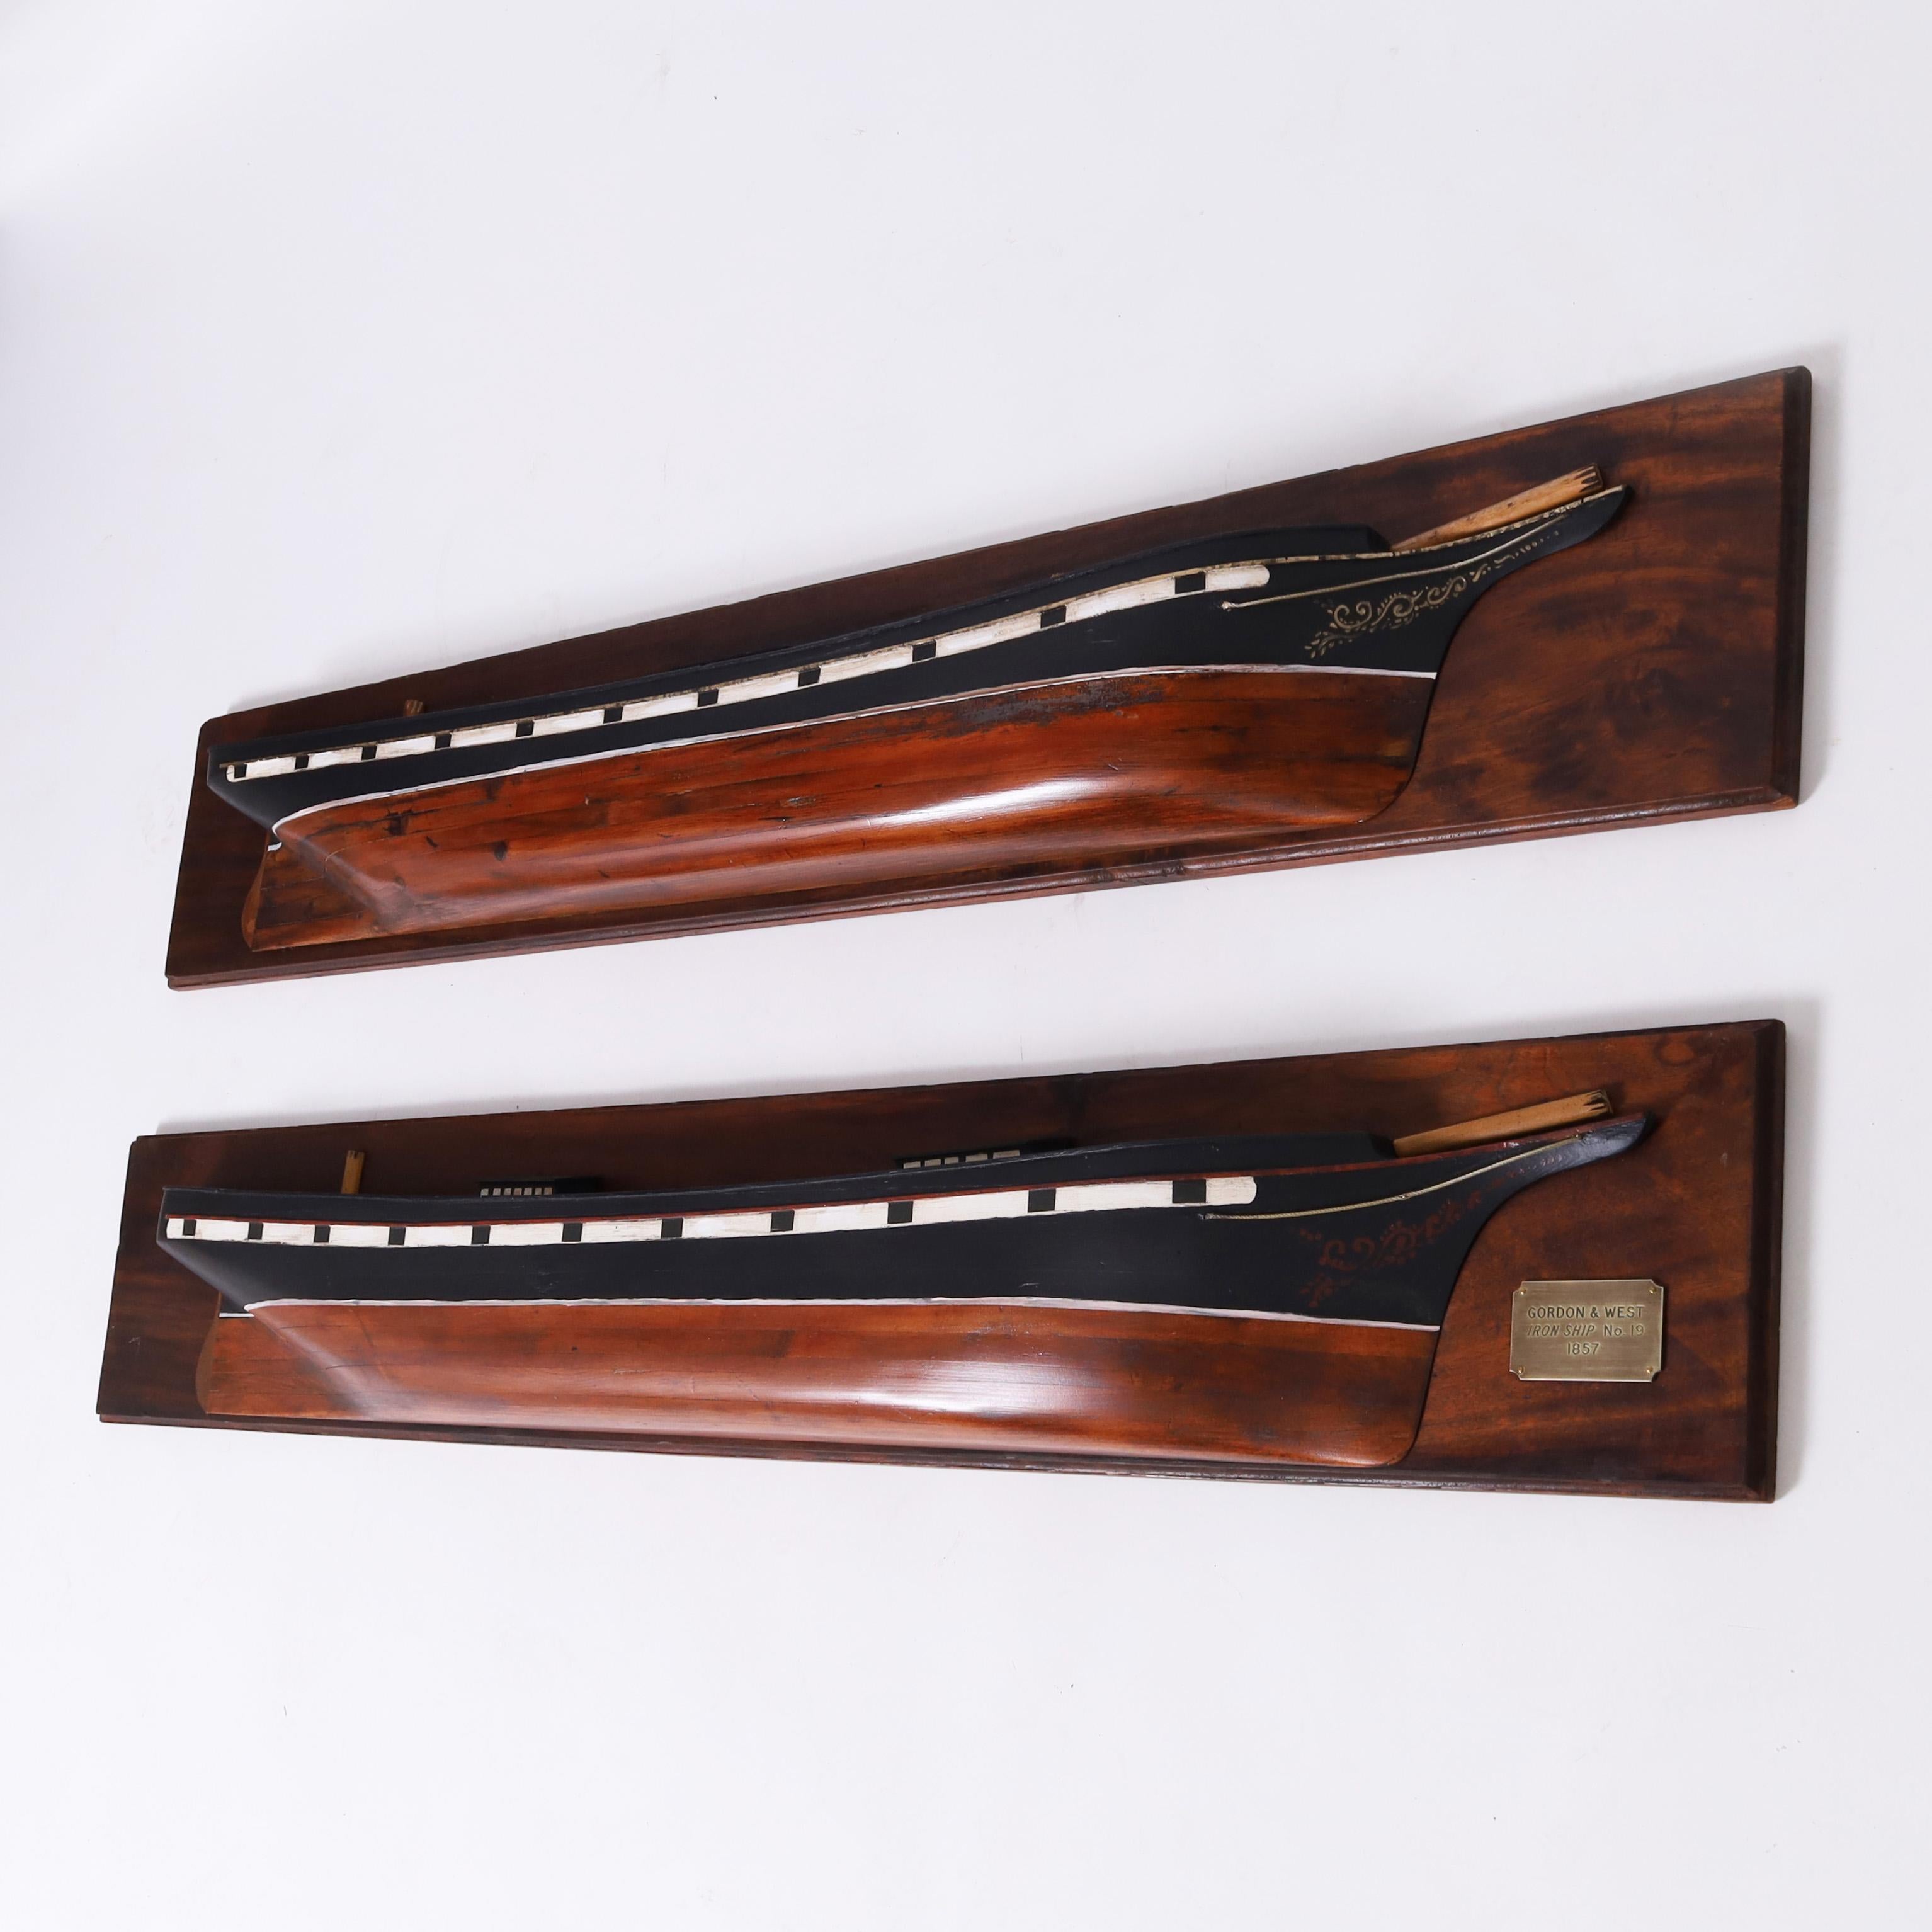 Impressive pair of mirror image antique half hull models crafted in pine, paint decorated, and faithfully rendered in form to early iron ship hull designs and mounted on mahogany plagues.